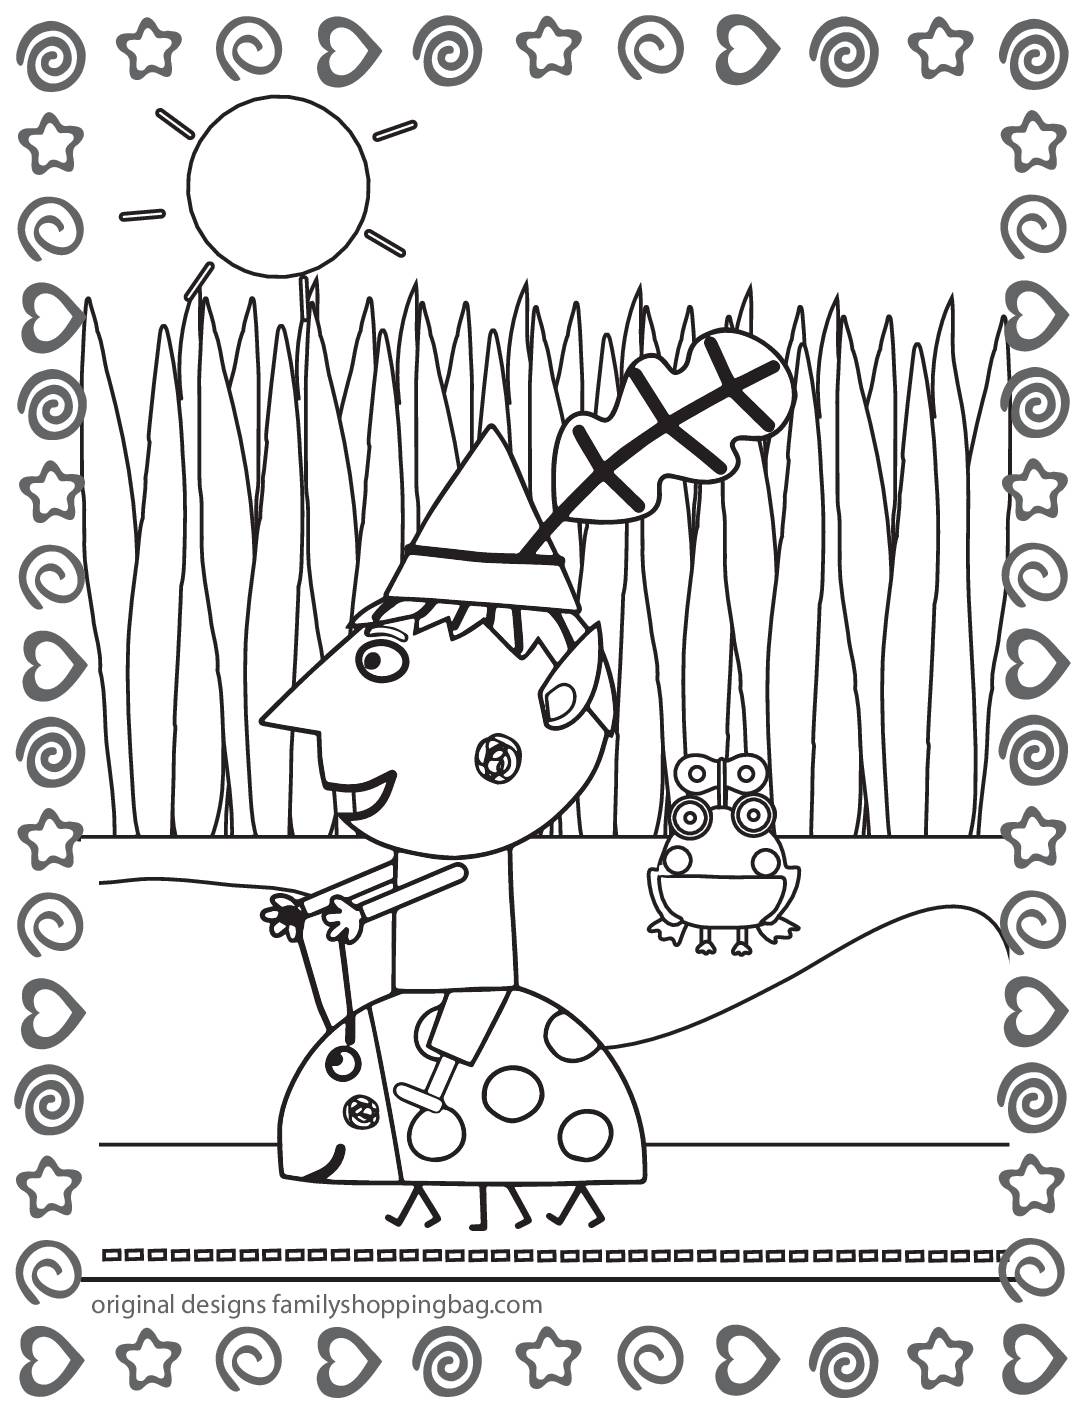 Coloring Page 6 Ben & Holly